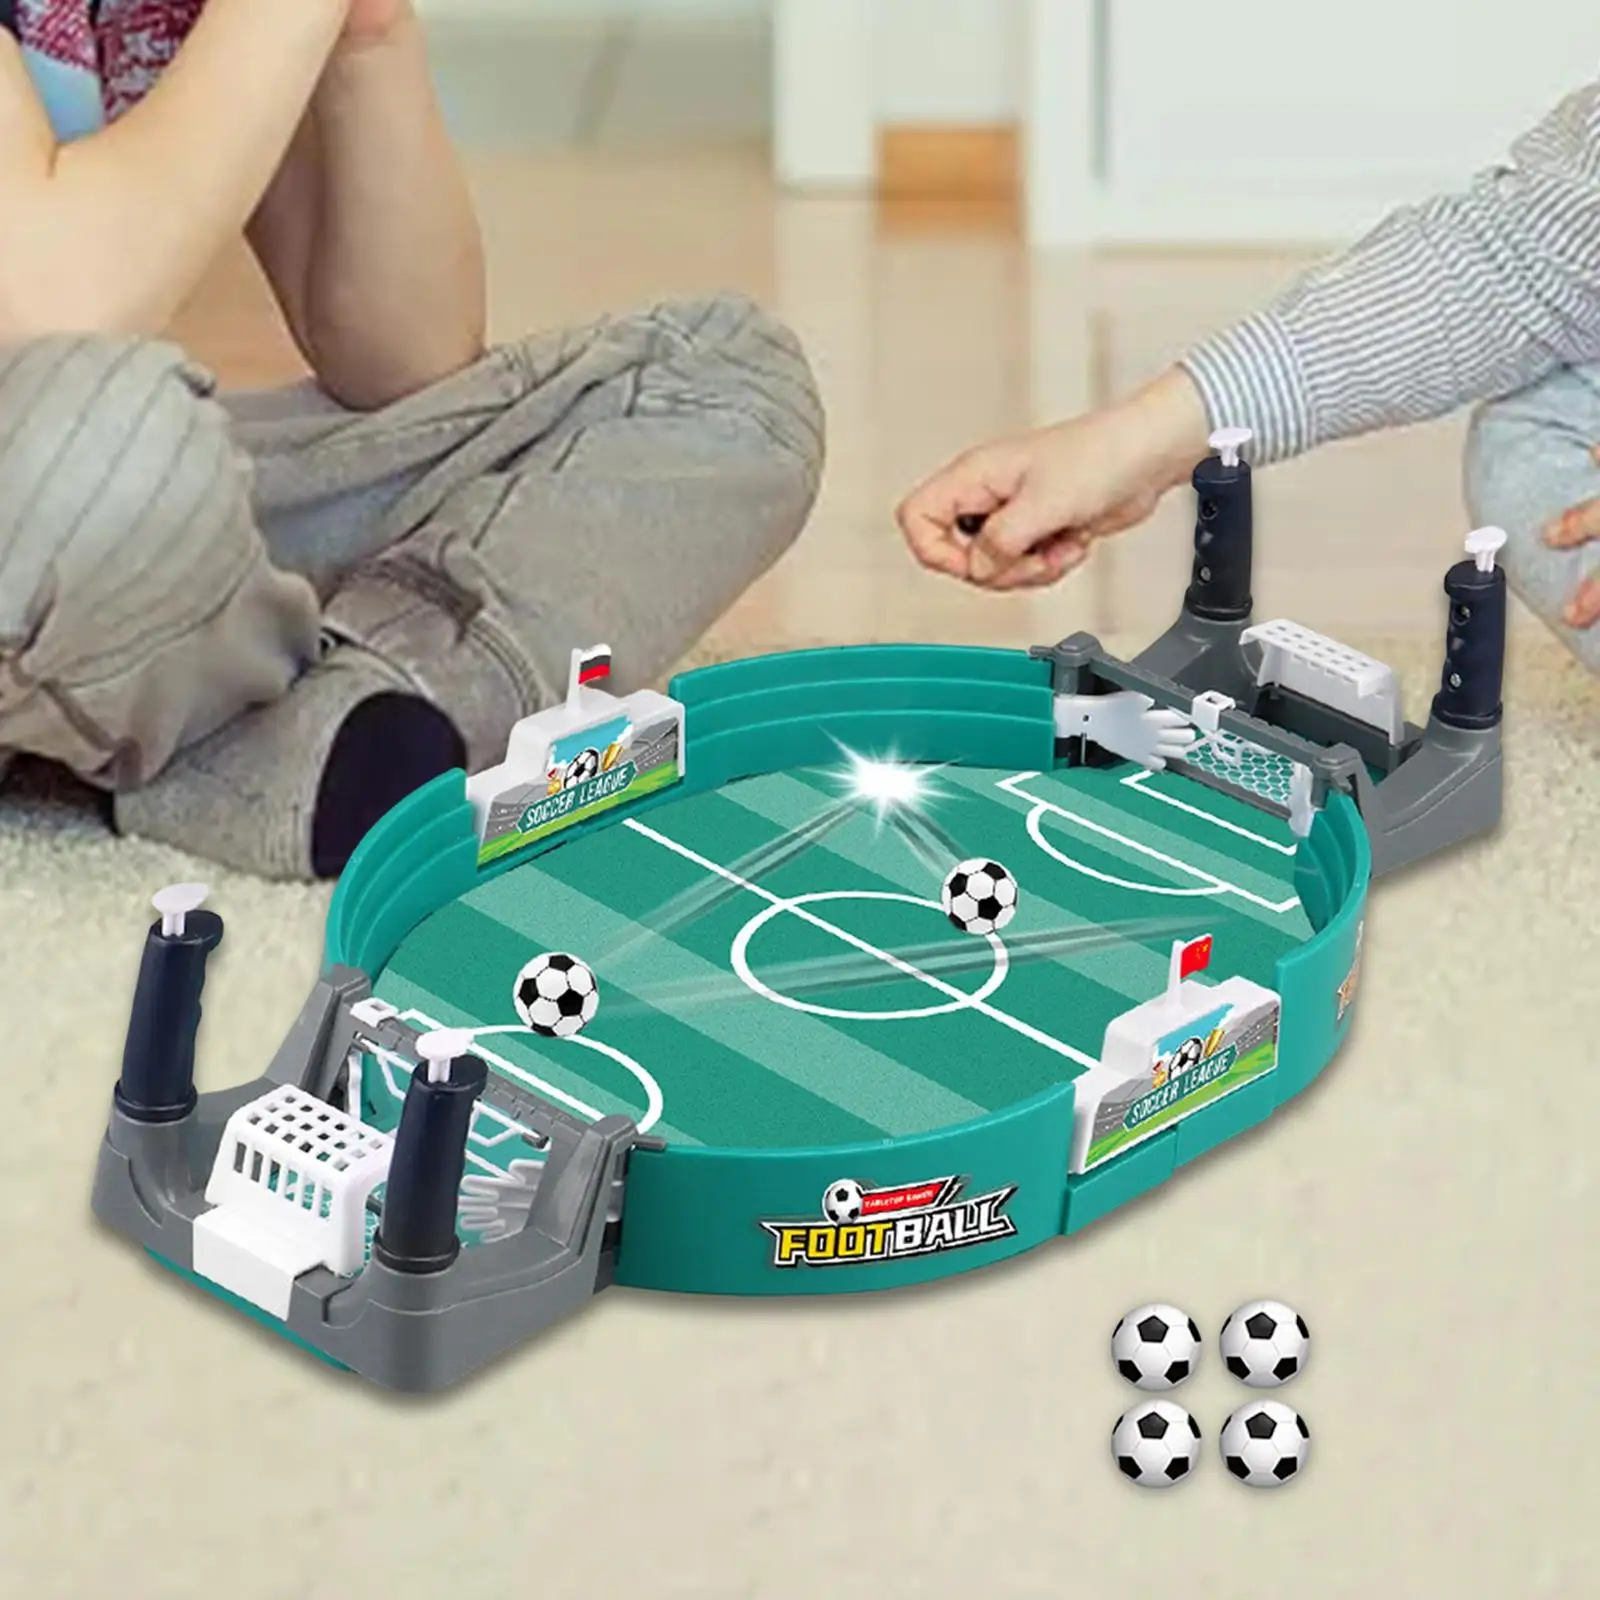 Soccer Football Games Tabletop Football Pinball Games for Family Night Adults